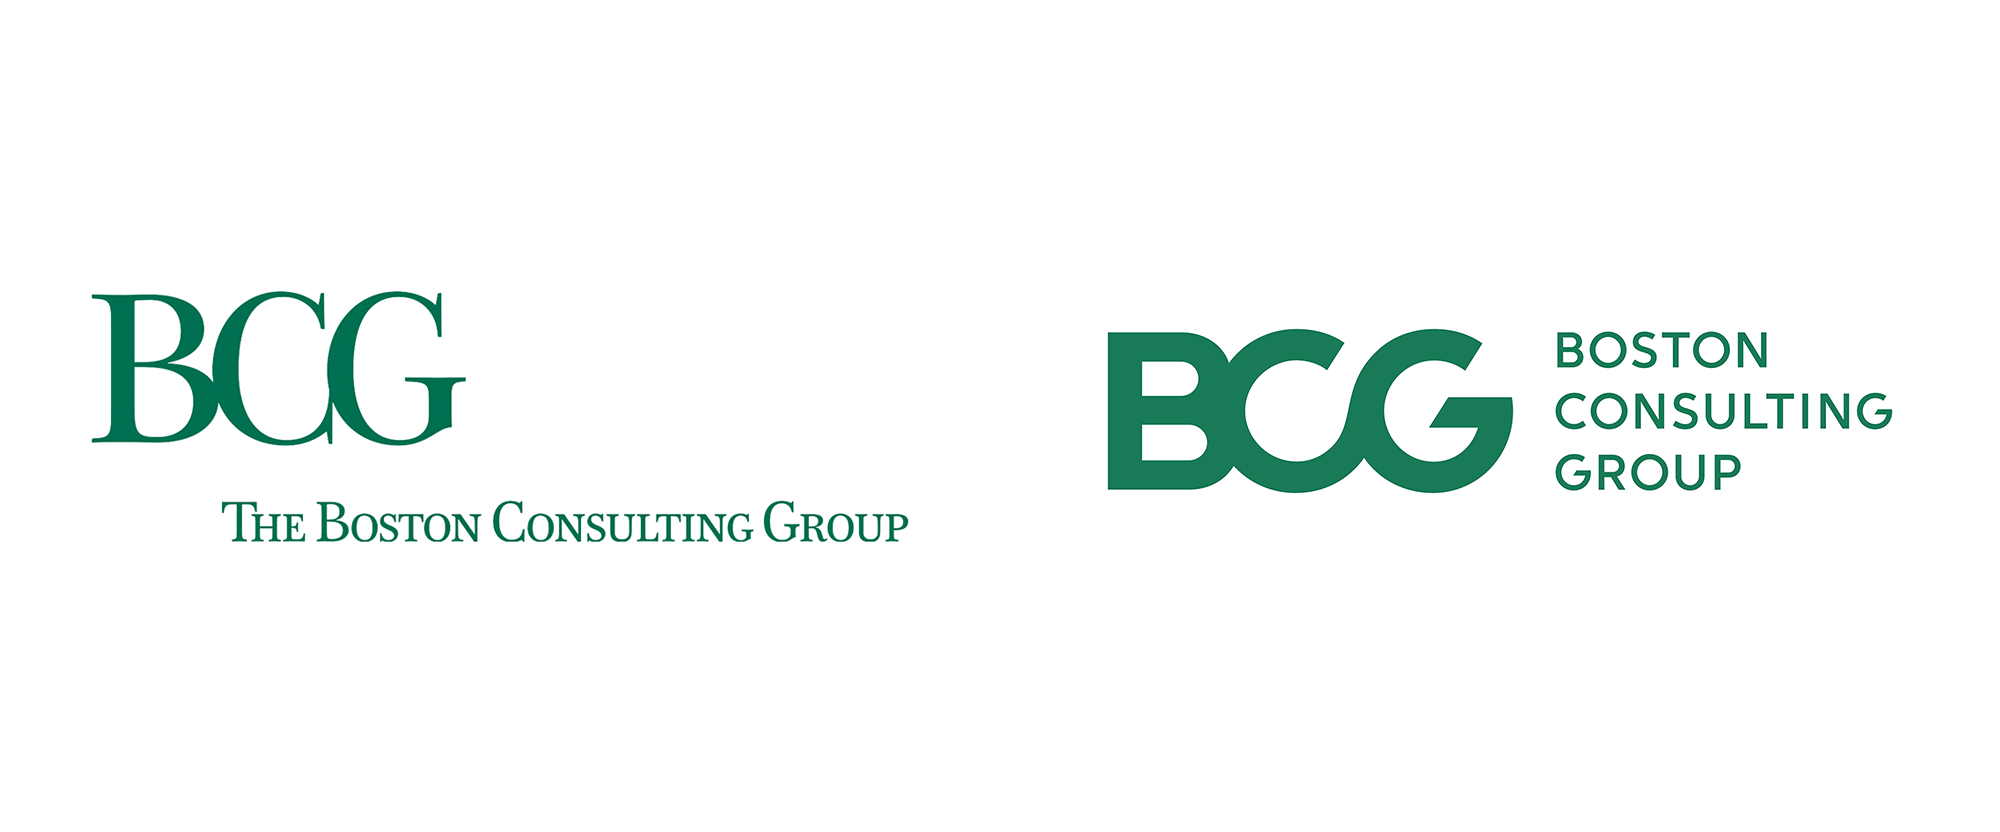 Brand New New Logo and Identity for Boston Consulting Group by Carbone